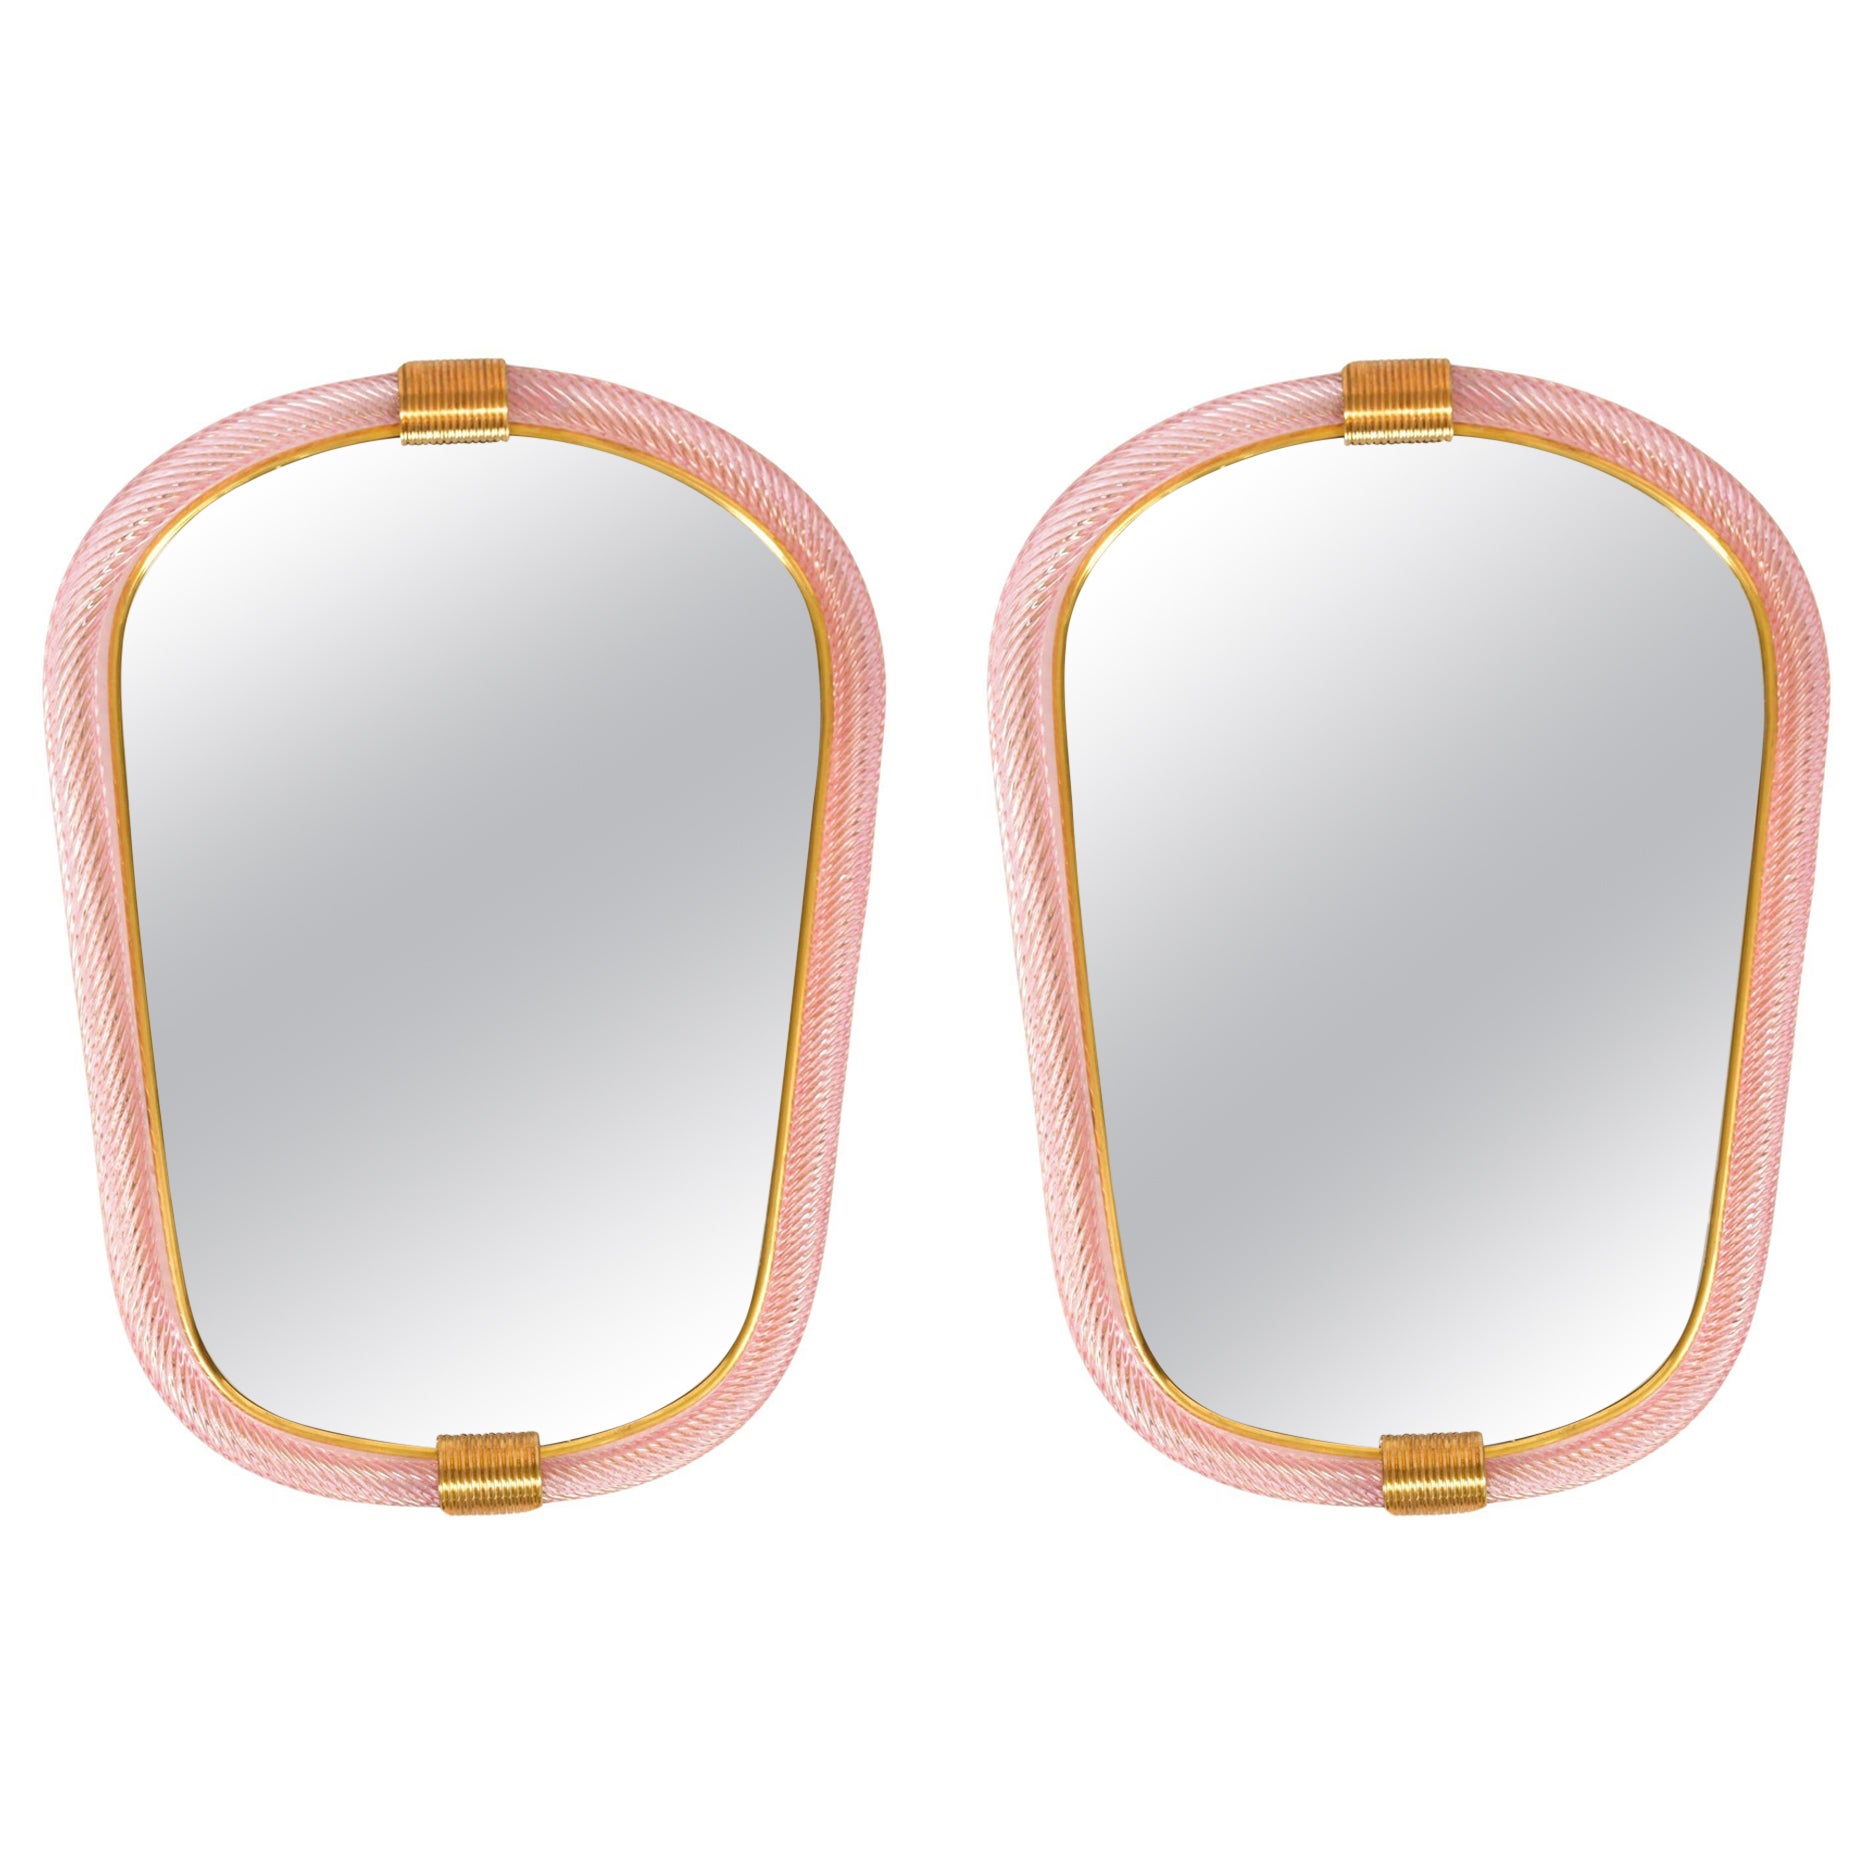 Pair of Murano pink Twisted Rope 'Firenze' Mirrors, Style of Barovier e Toso For Sale